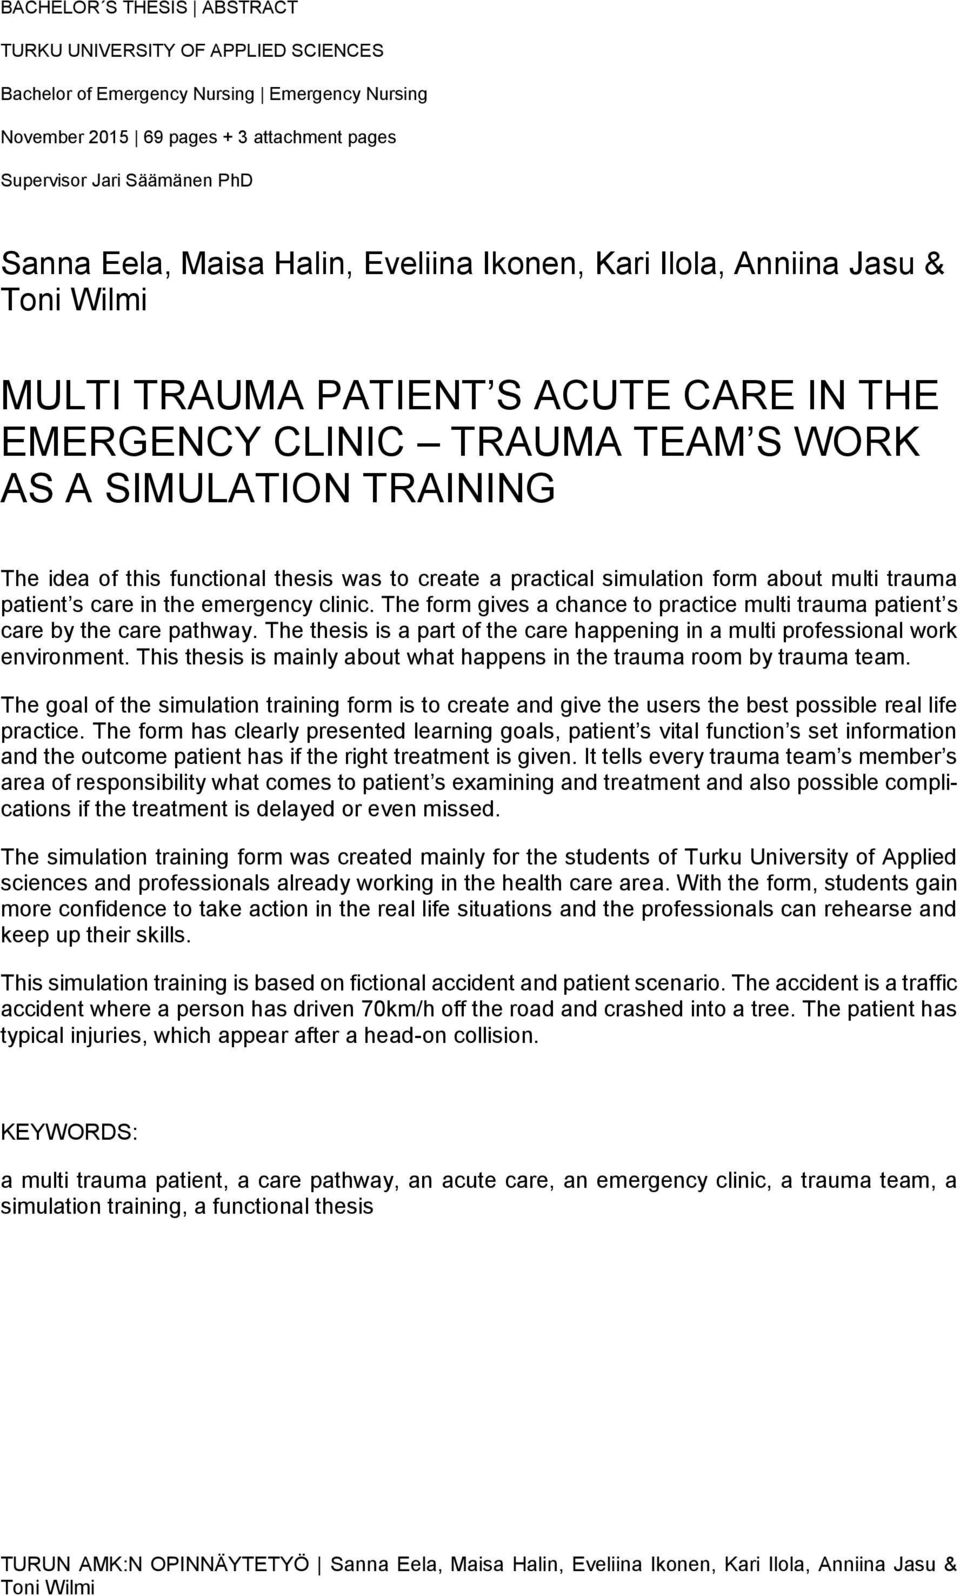 to create a practical simulation form about multi trauma patient s care in the emergency clinic. The form gives a chance to practice multi trauma patient s care by the care pathway.